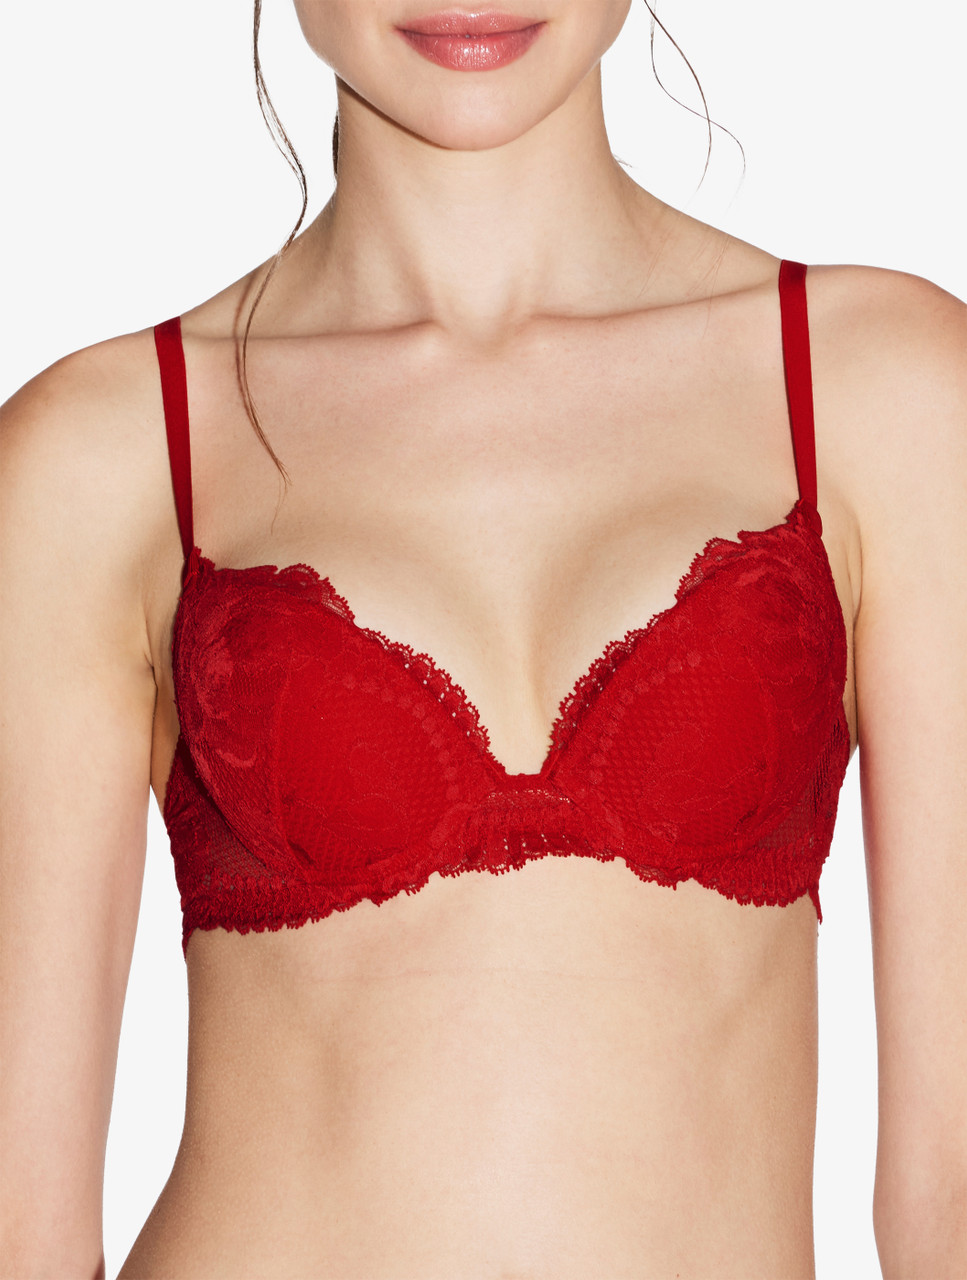 MAMIA Intimates Red Bow Accented U-Back Full Coverage Bra 34C